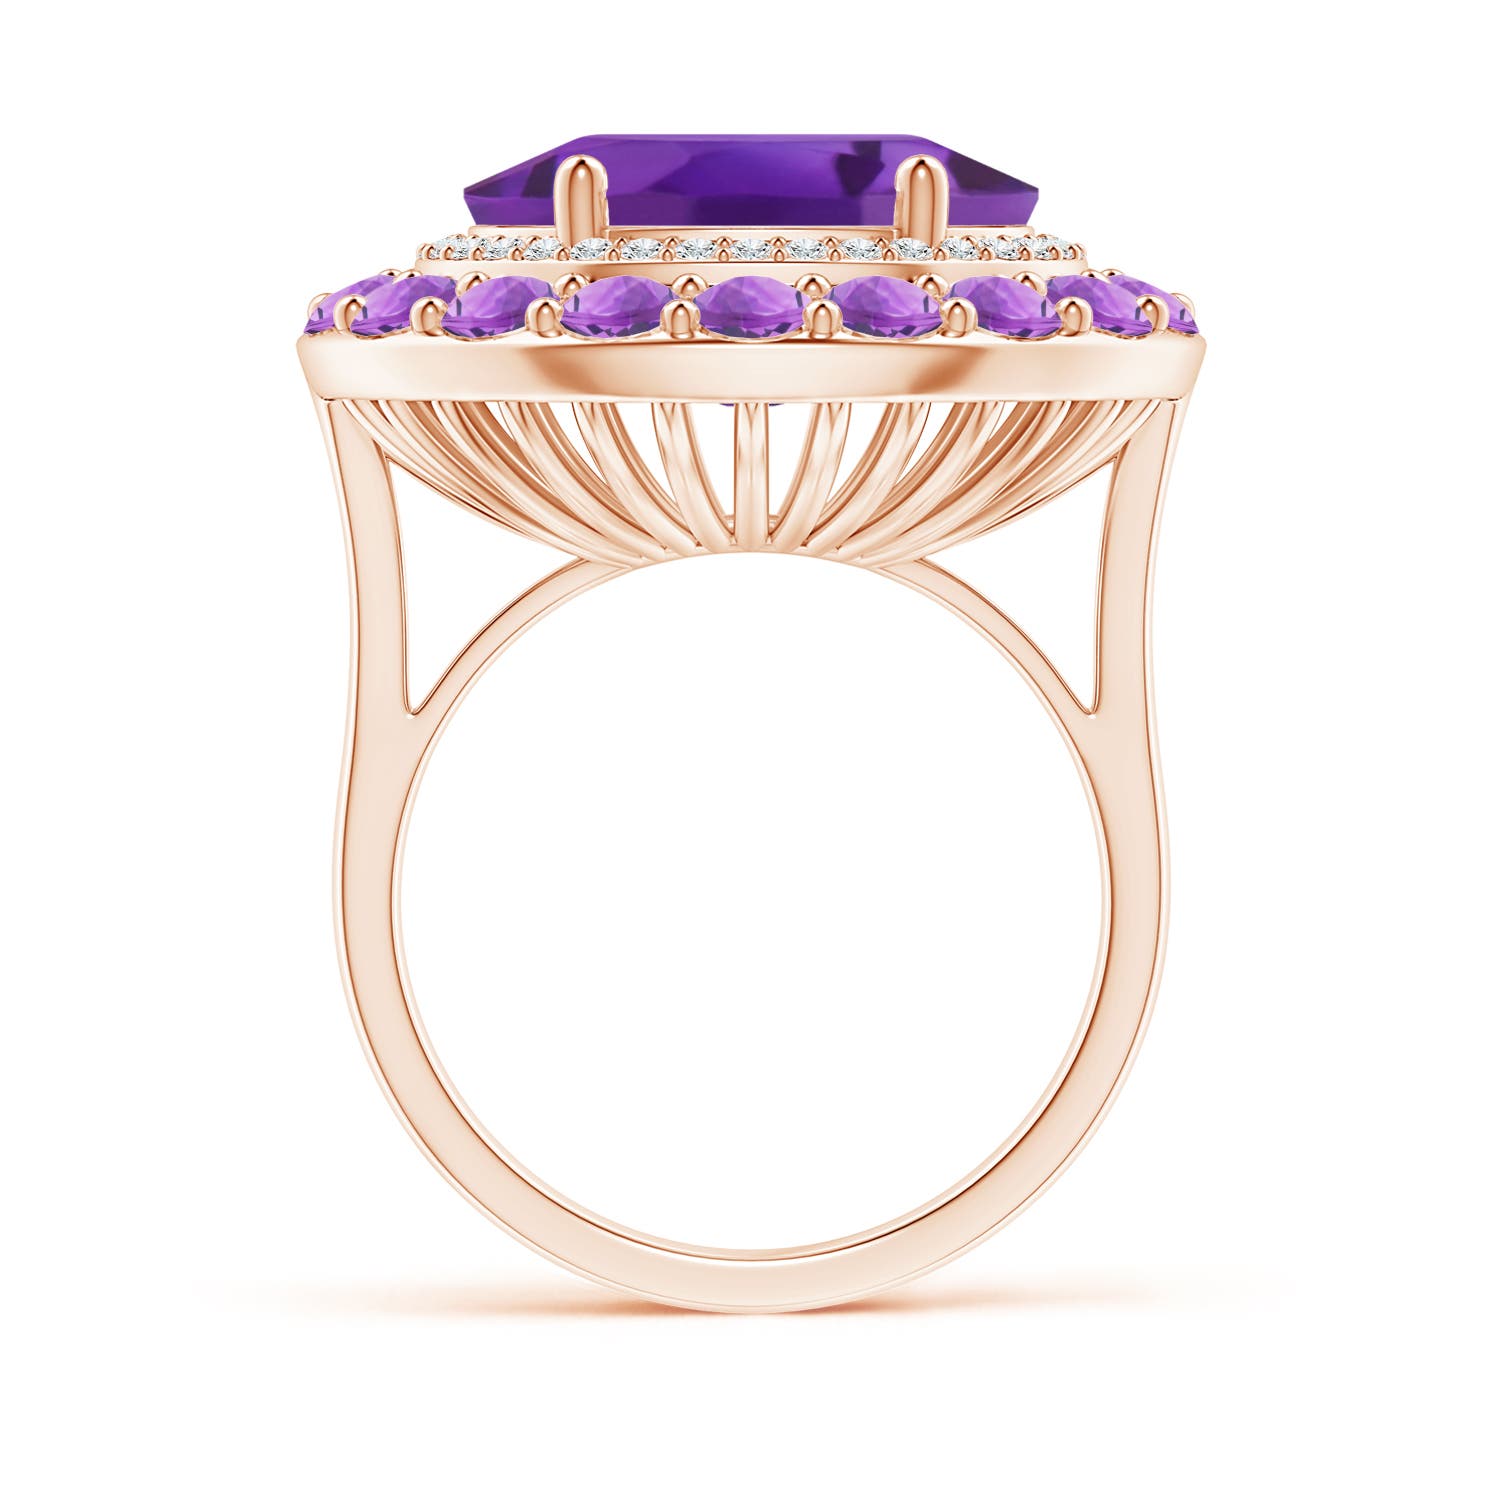 AAA - Amethyst / 8.52 CT / 14 KT Rose Gold